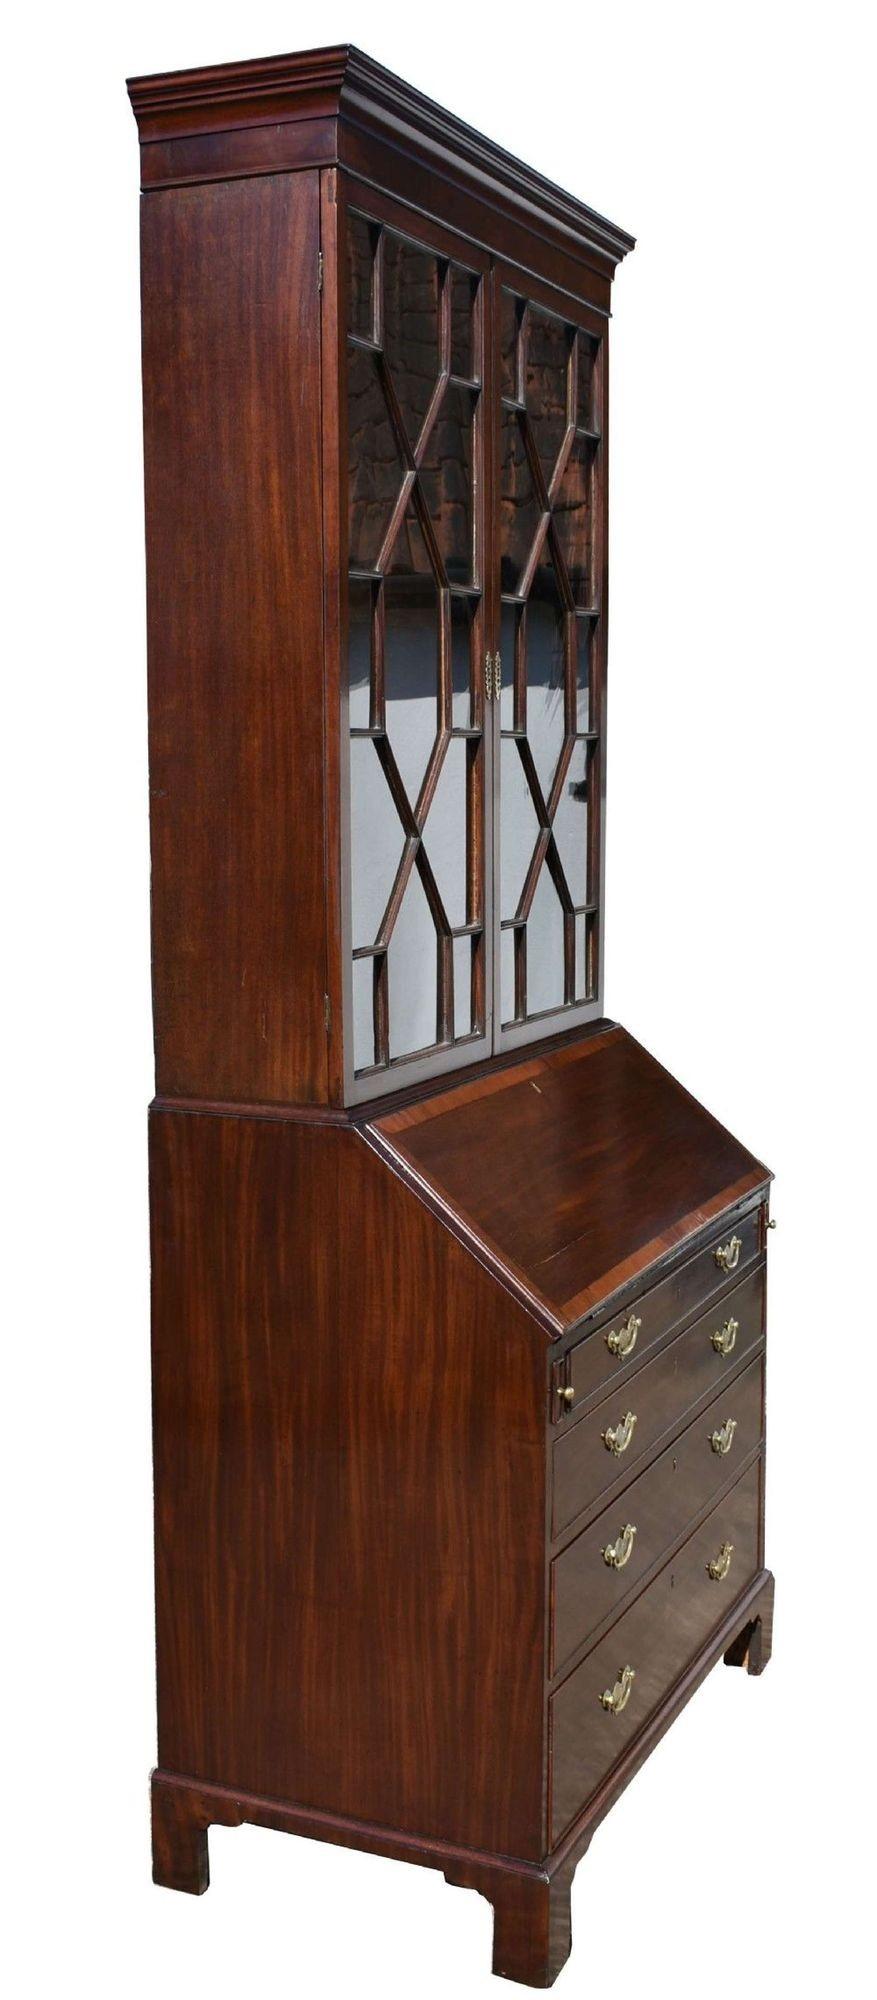 For sale is a good quality George III Mahogany Bureau Bookcase. Having two glazed doors in the top, both opening to reveal adjustable shelves. Below this is the bureau section, with a fall front, opening to display a fully fitted interior consisting